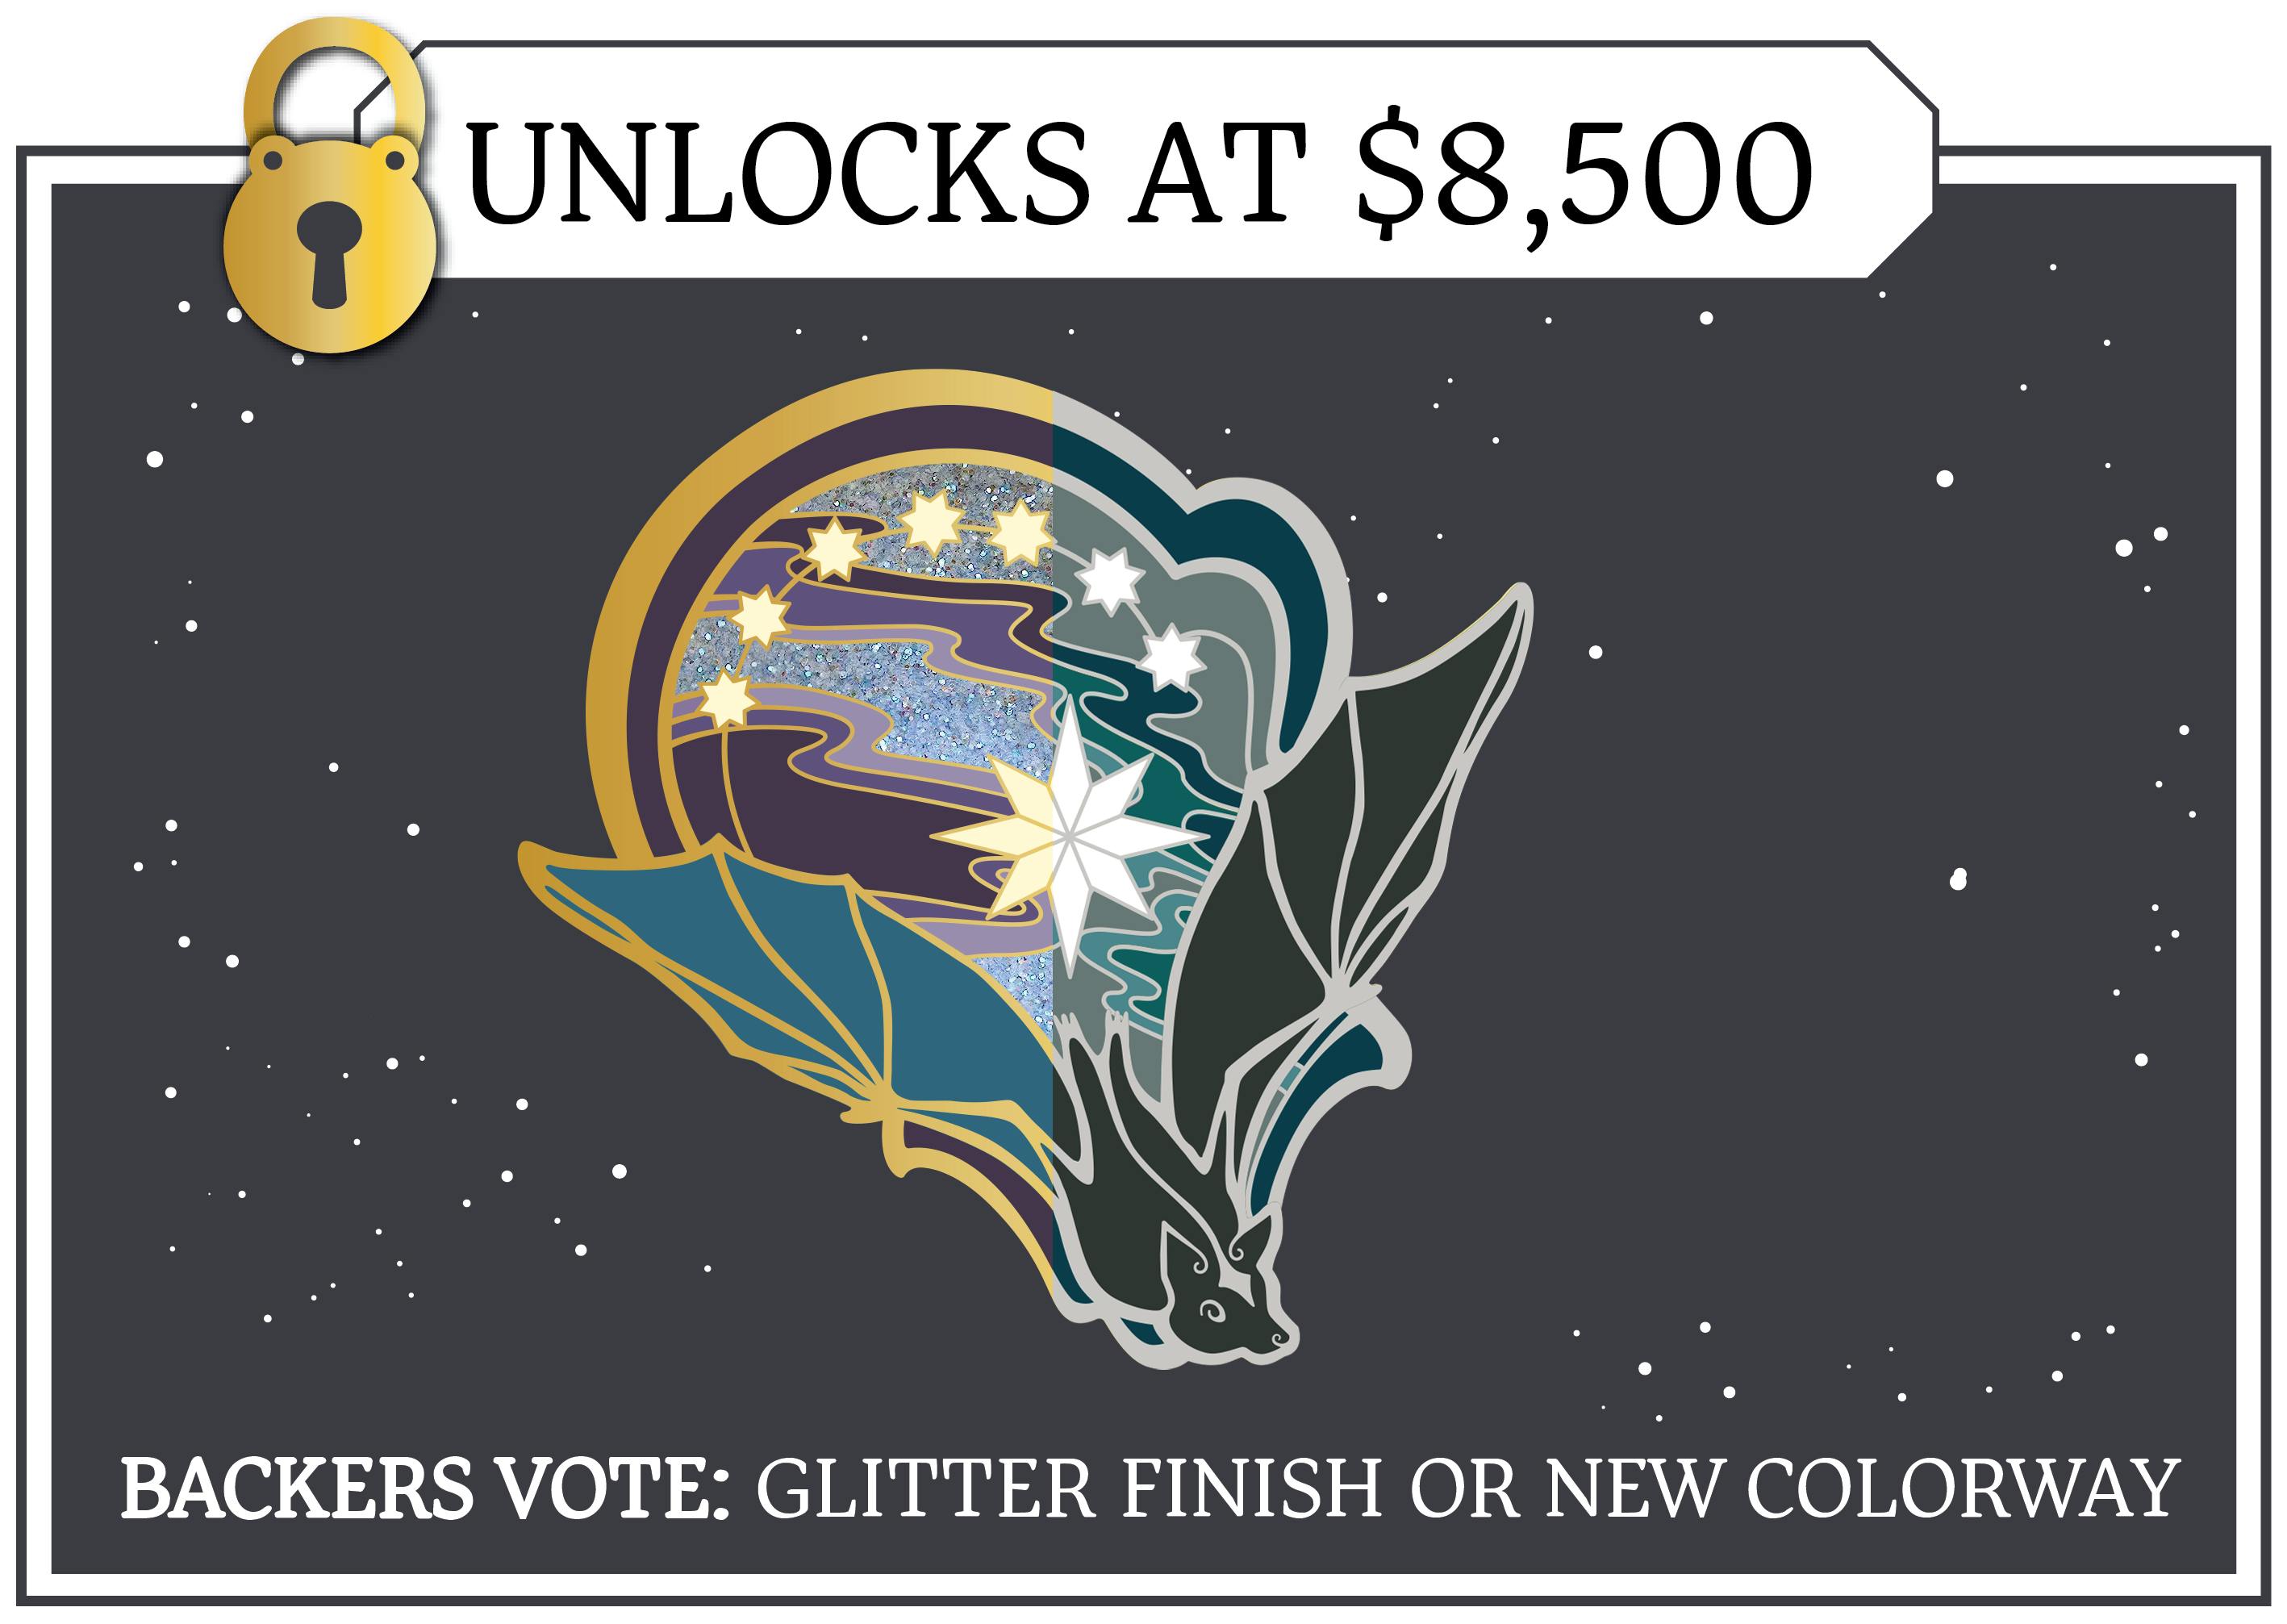 Stretch Goal #2: Backers' choice - new colorway or glitter finish